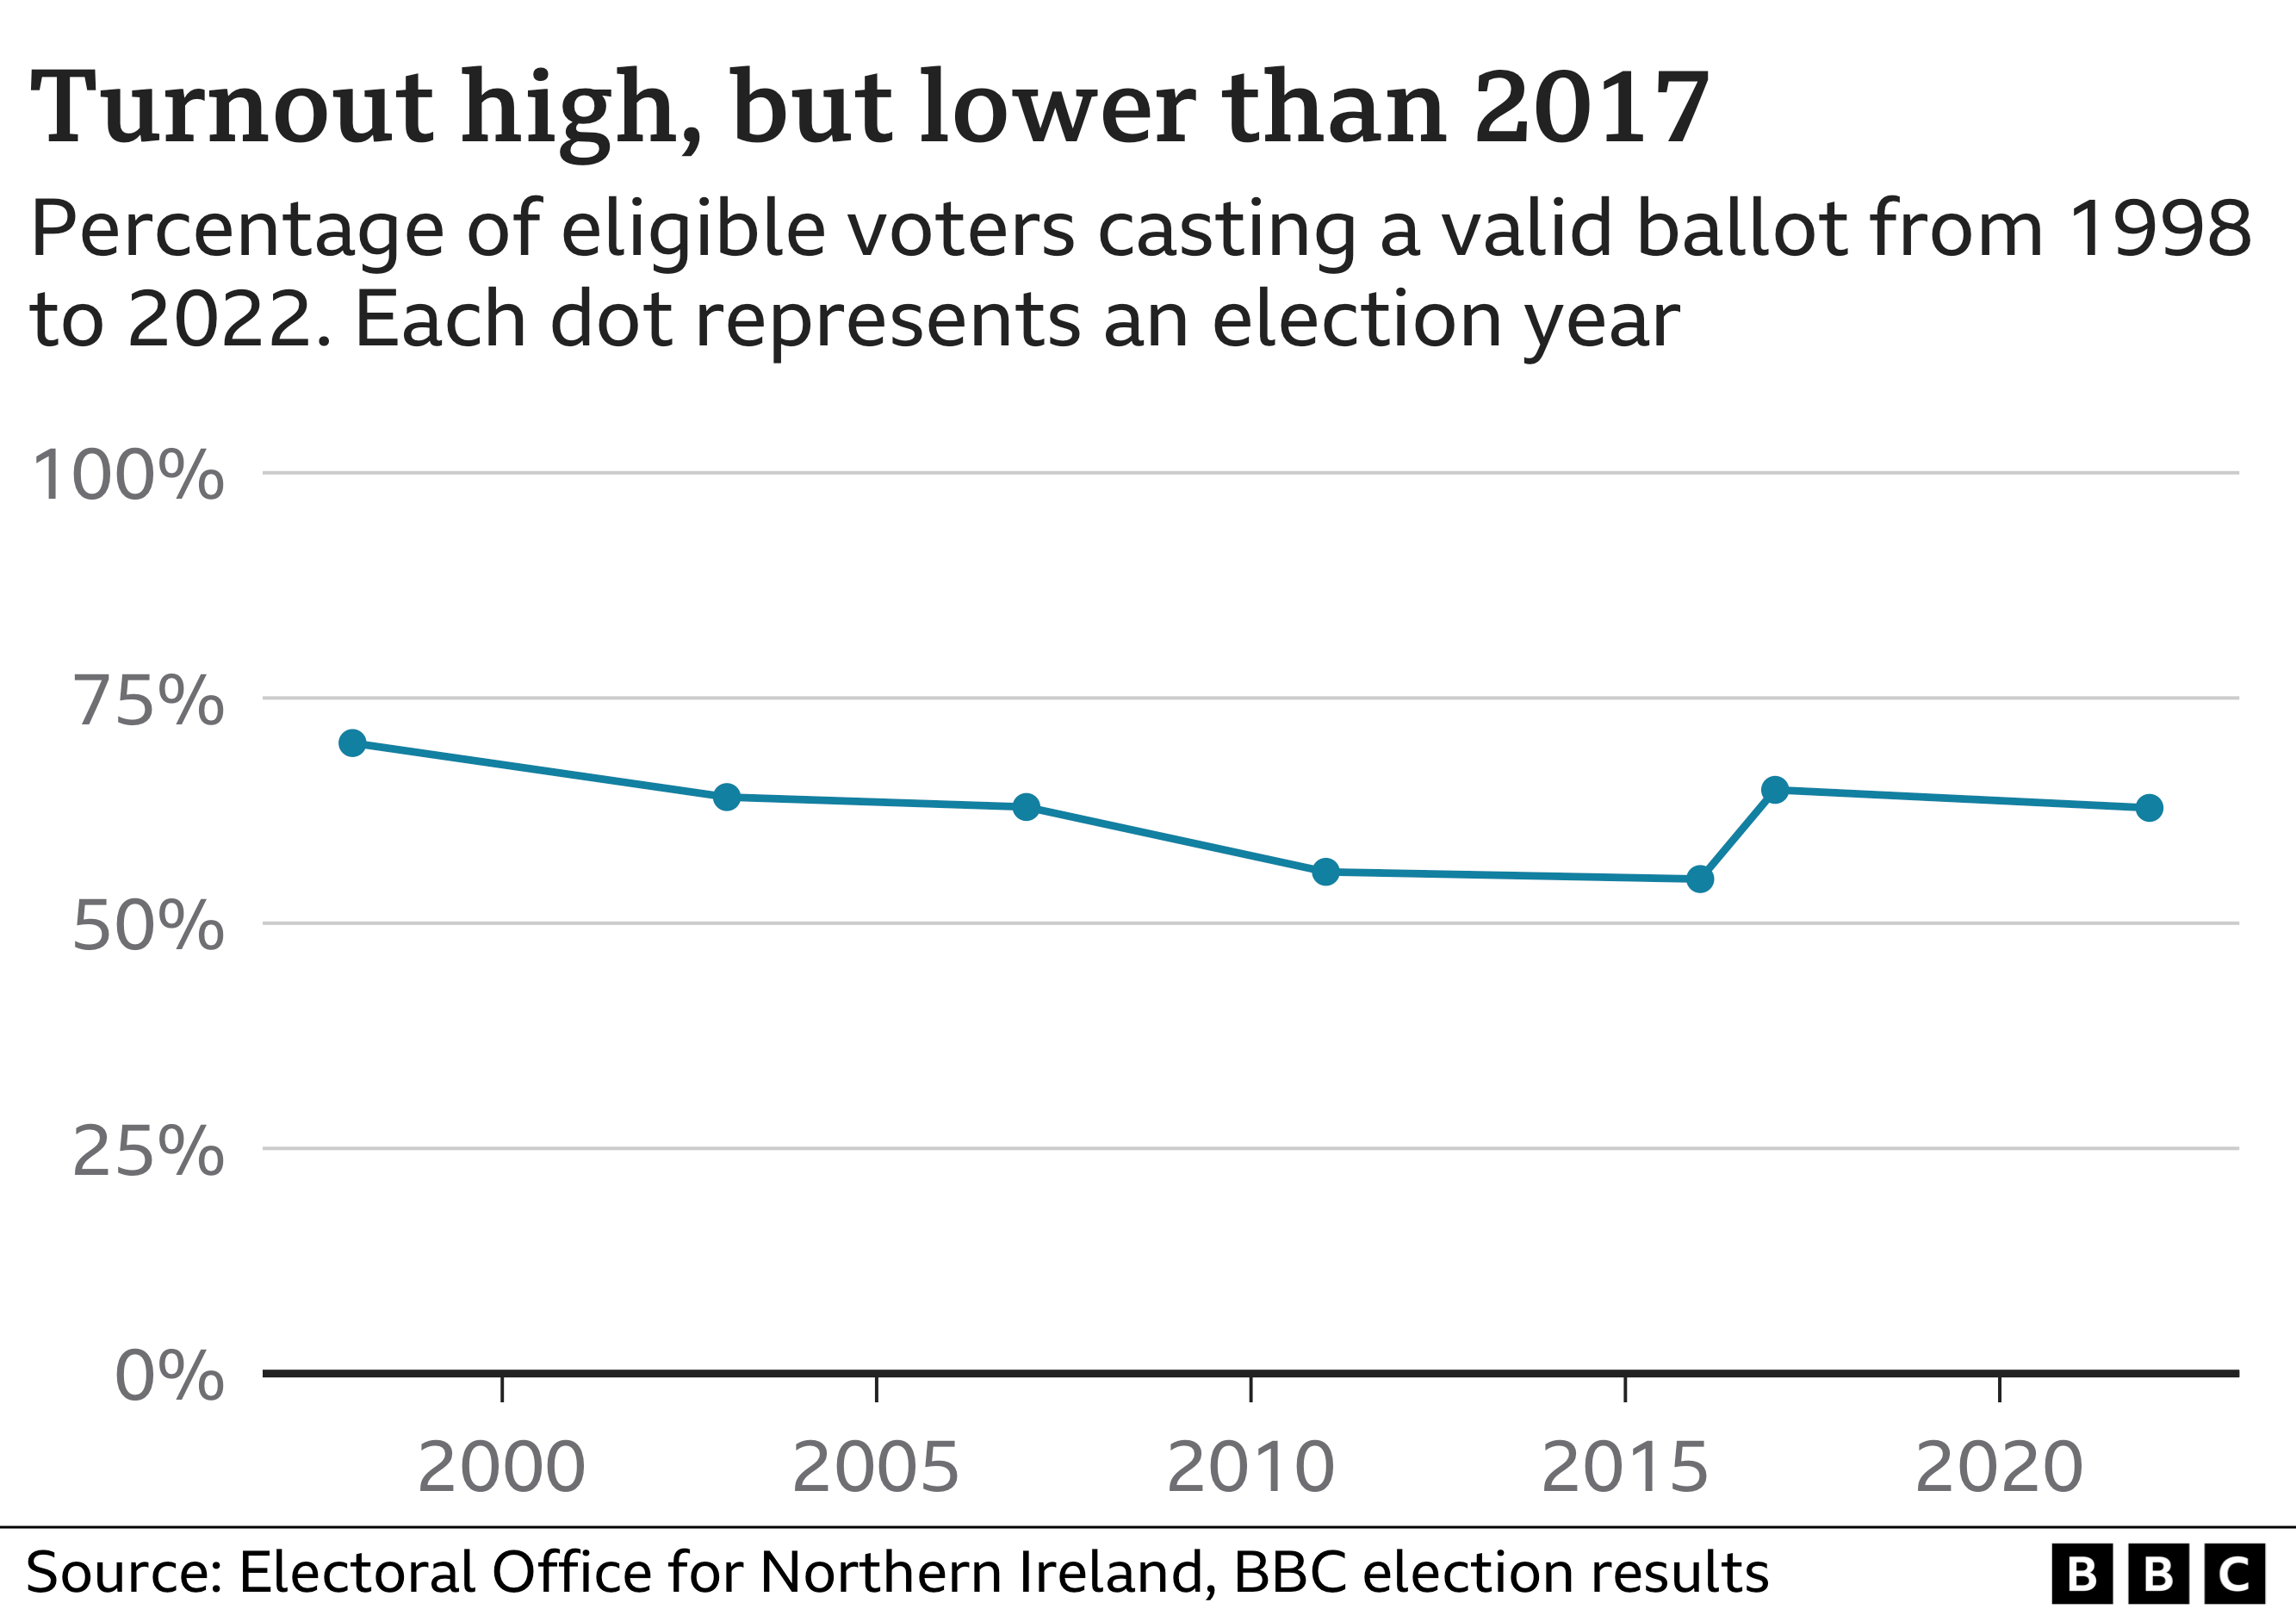 Turnout over time